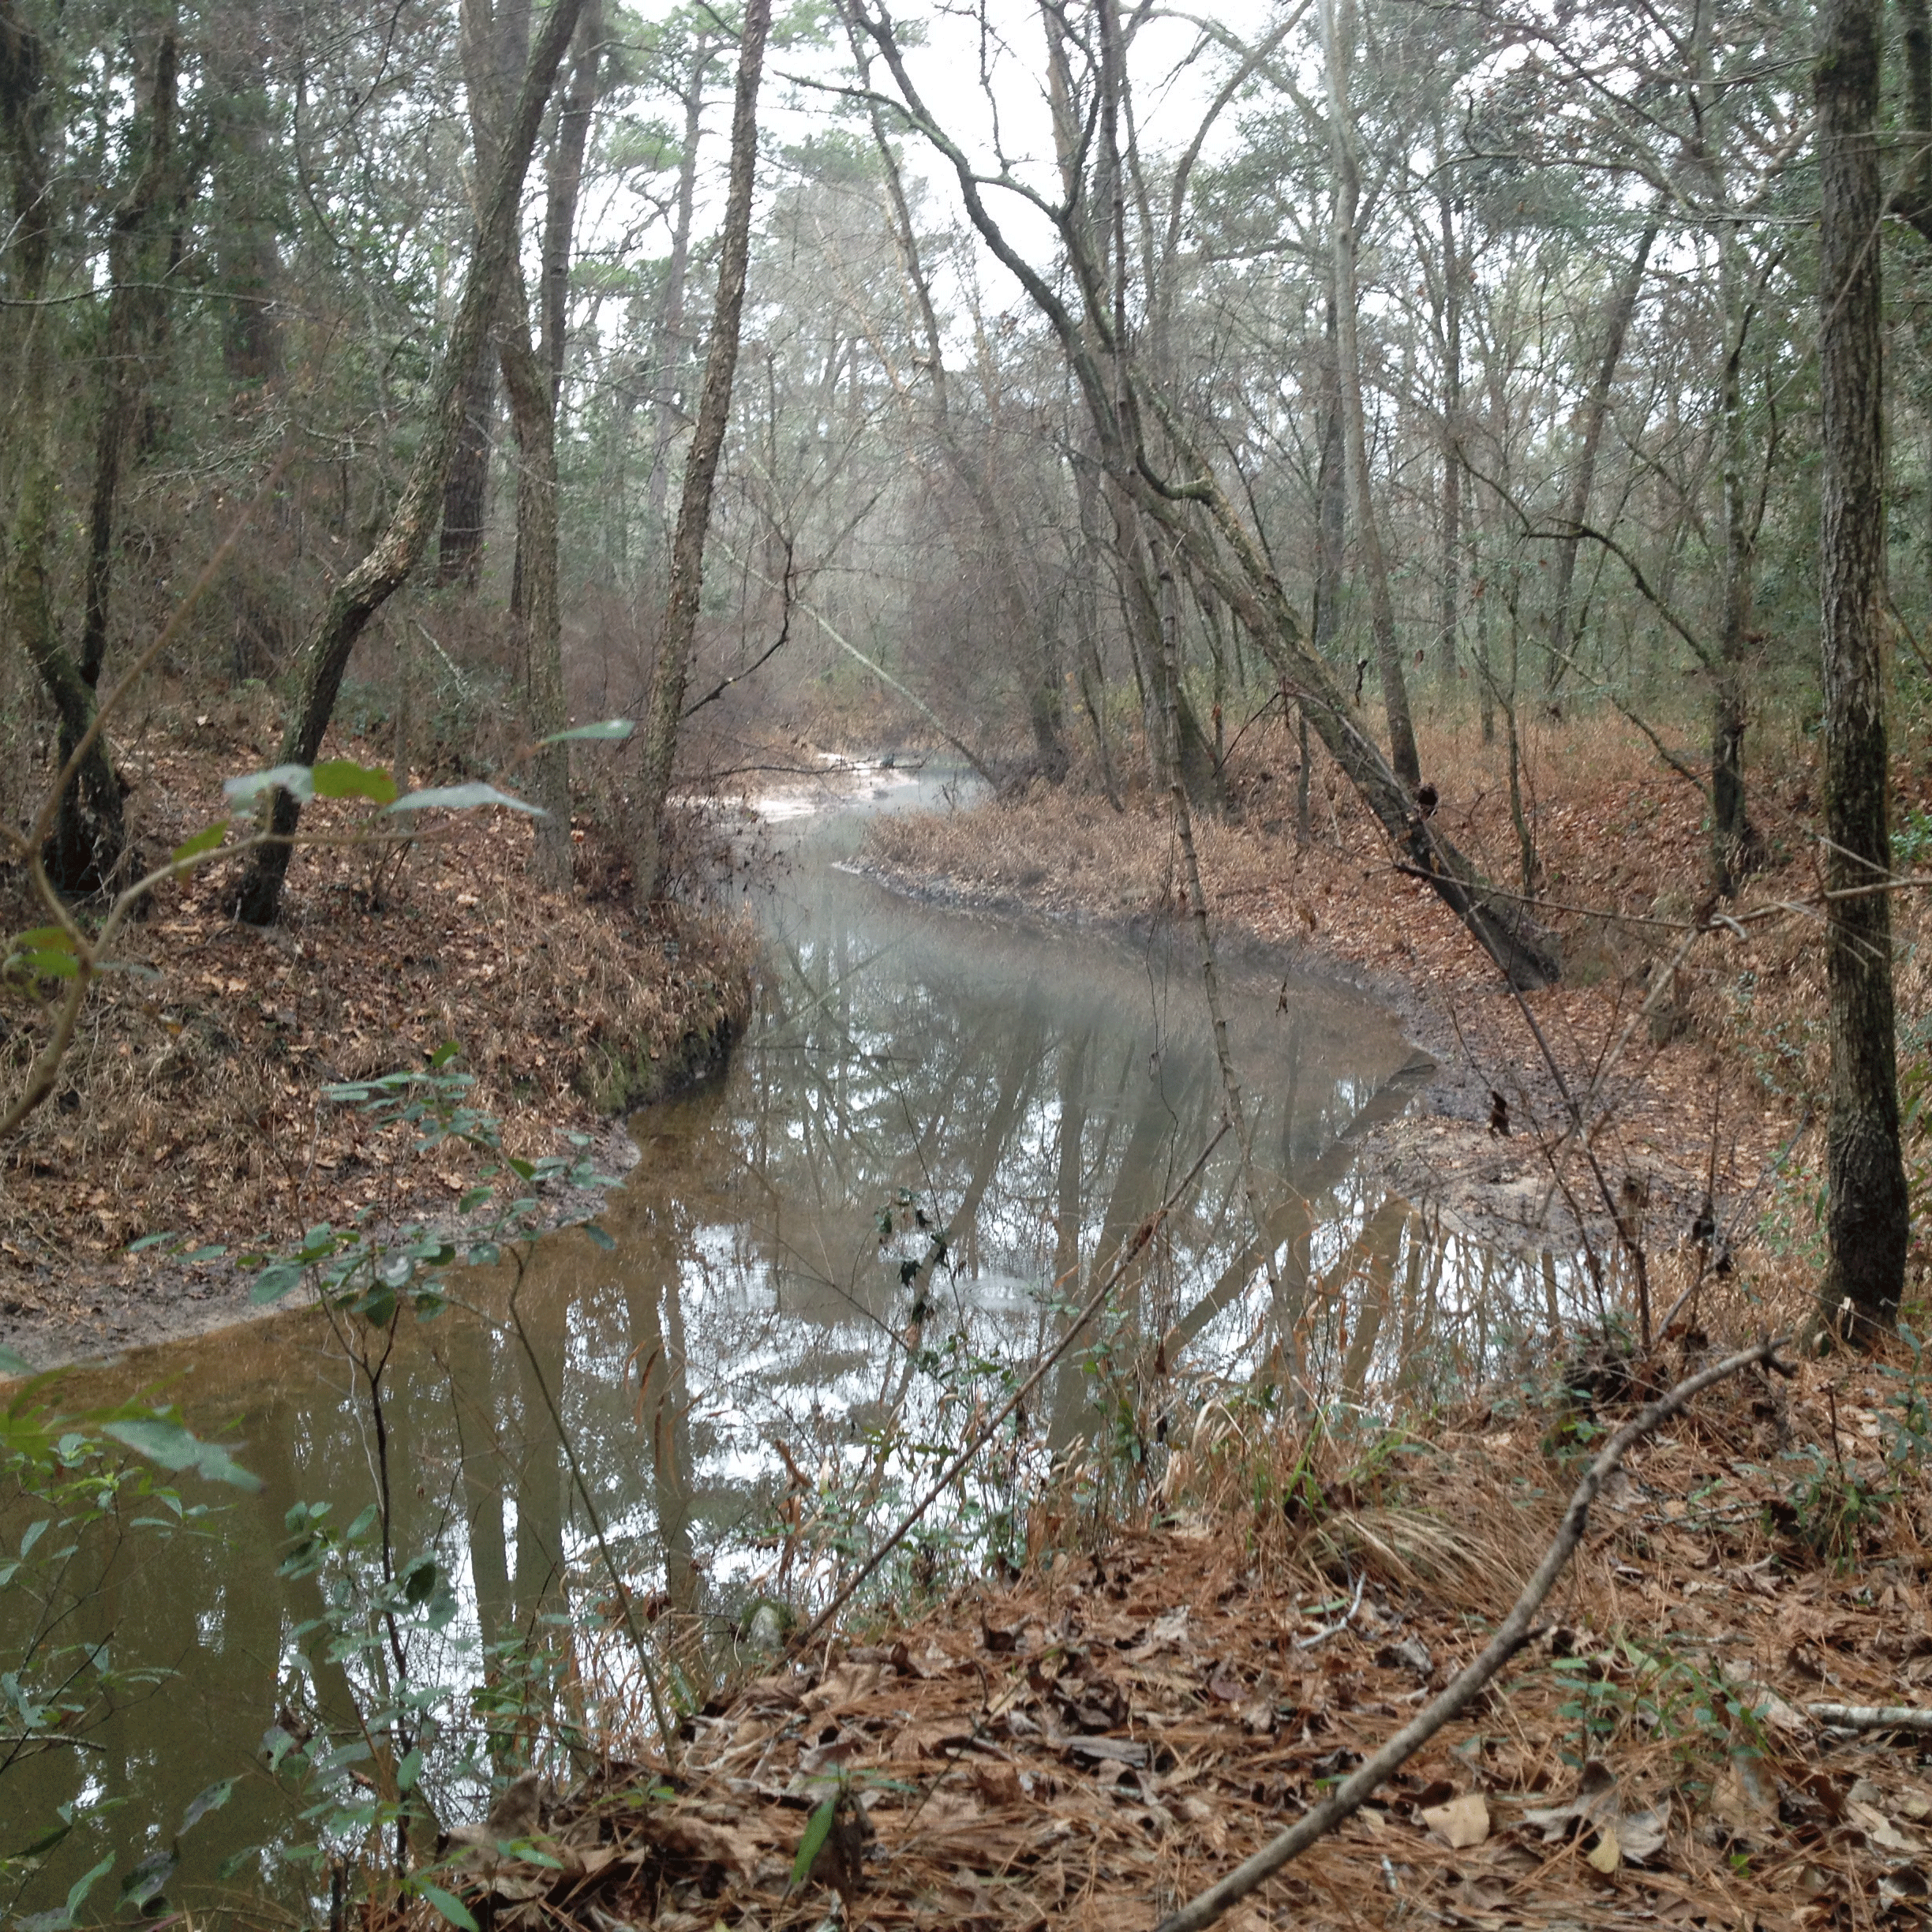 The meandering Winters Bayou is covered in a light haze of mist